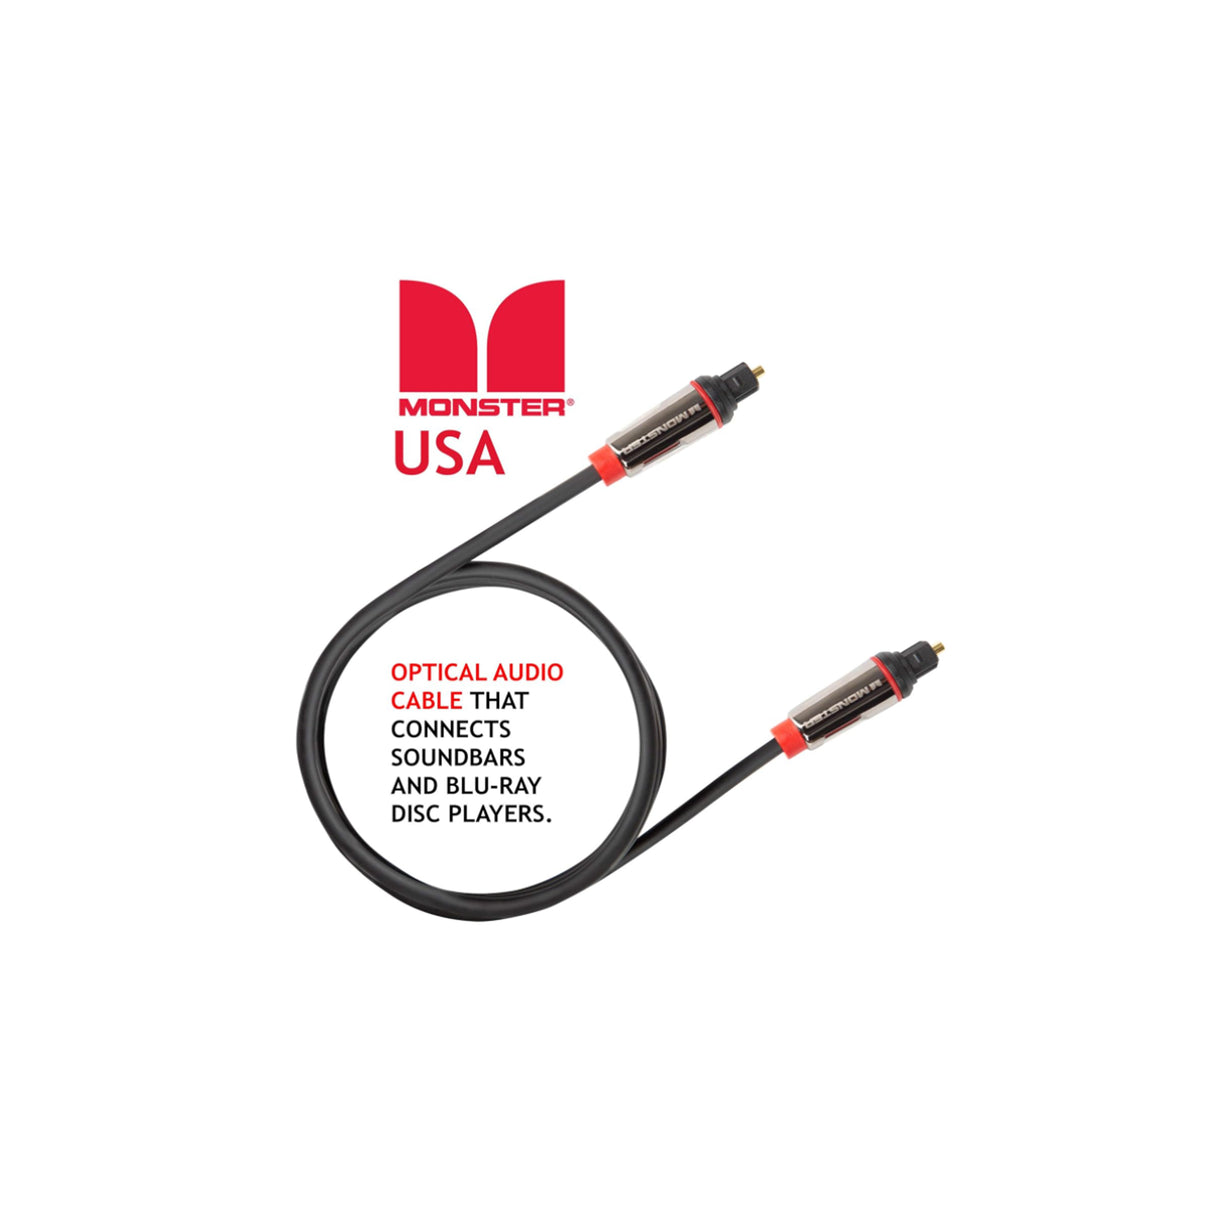 Monster Optical Audio Cable (140891-00) - (1.82 Meter/6FT) Connects Soundbars and Blue-Ray Disc players